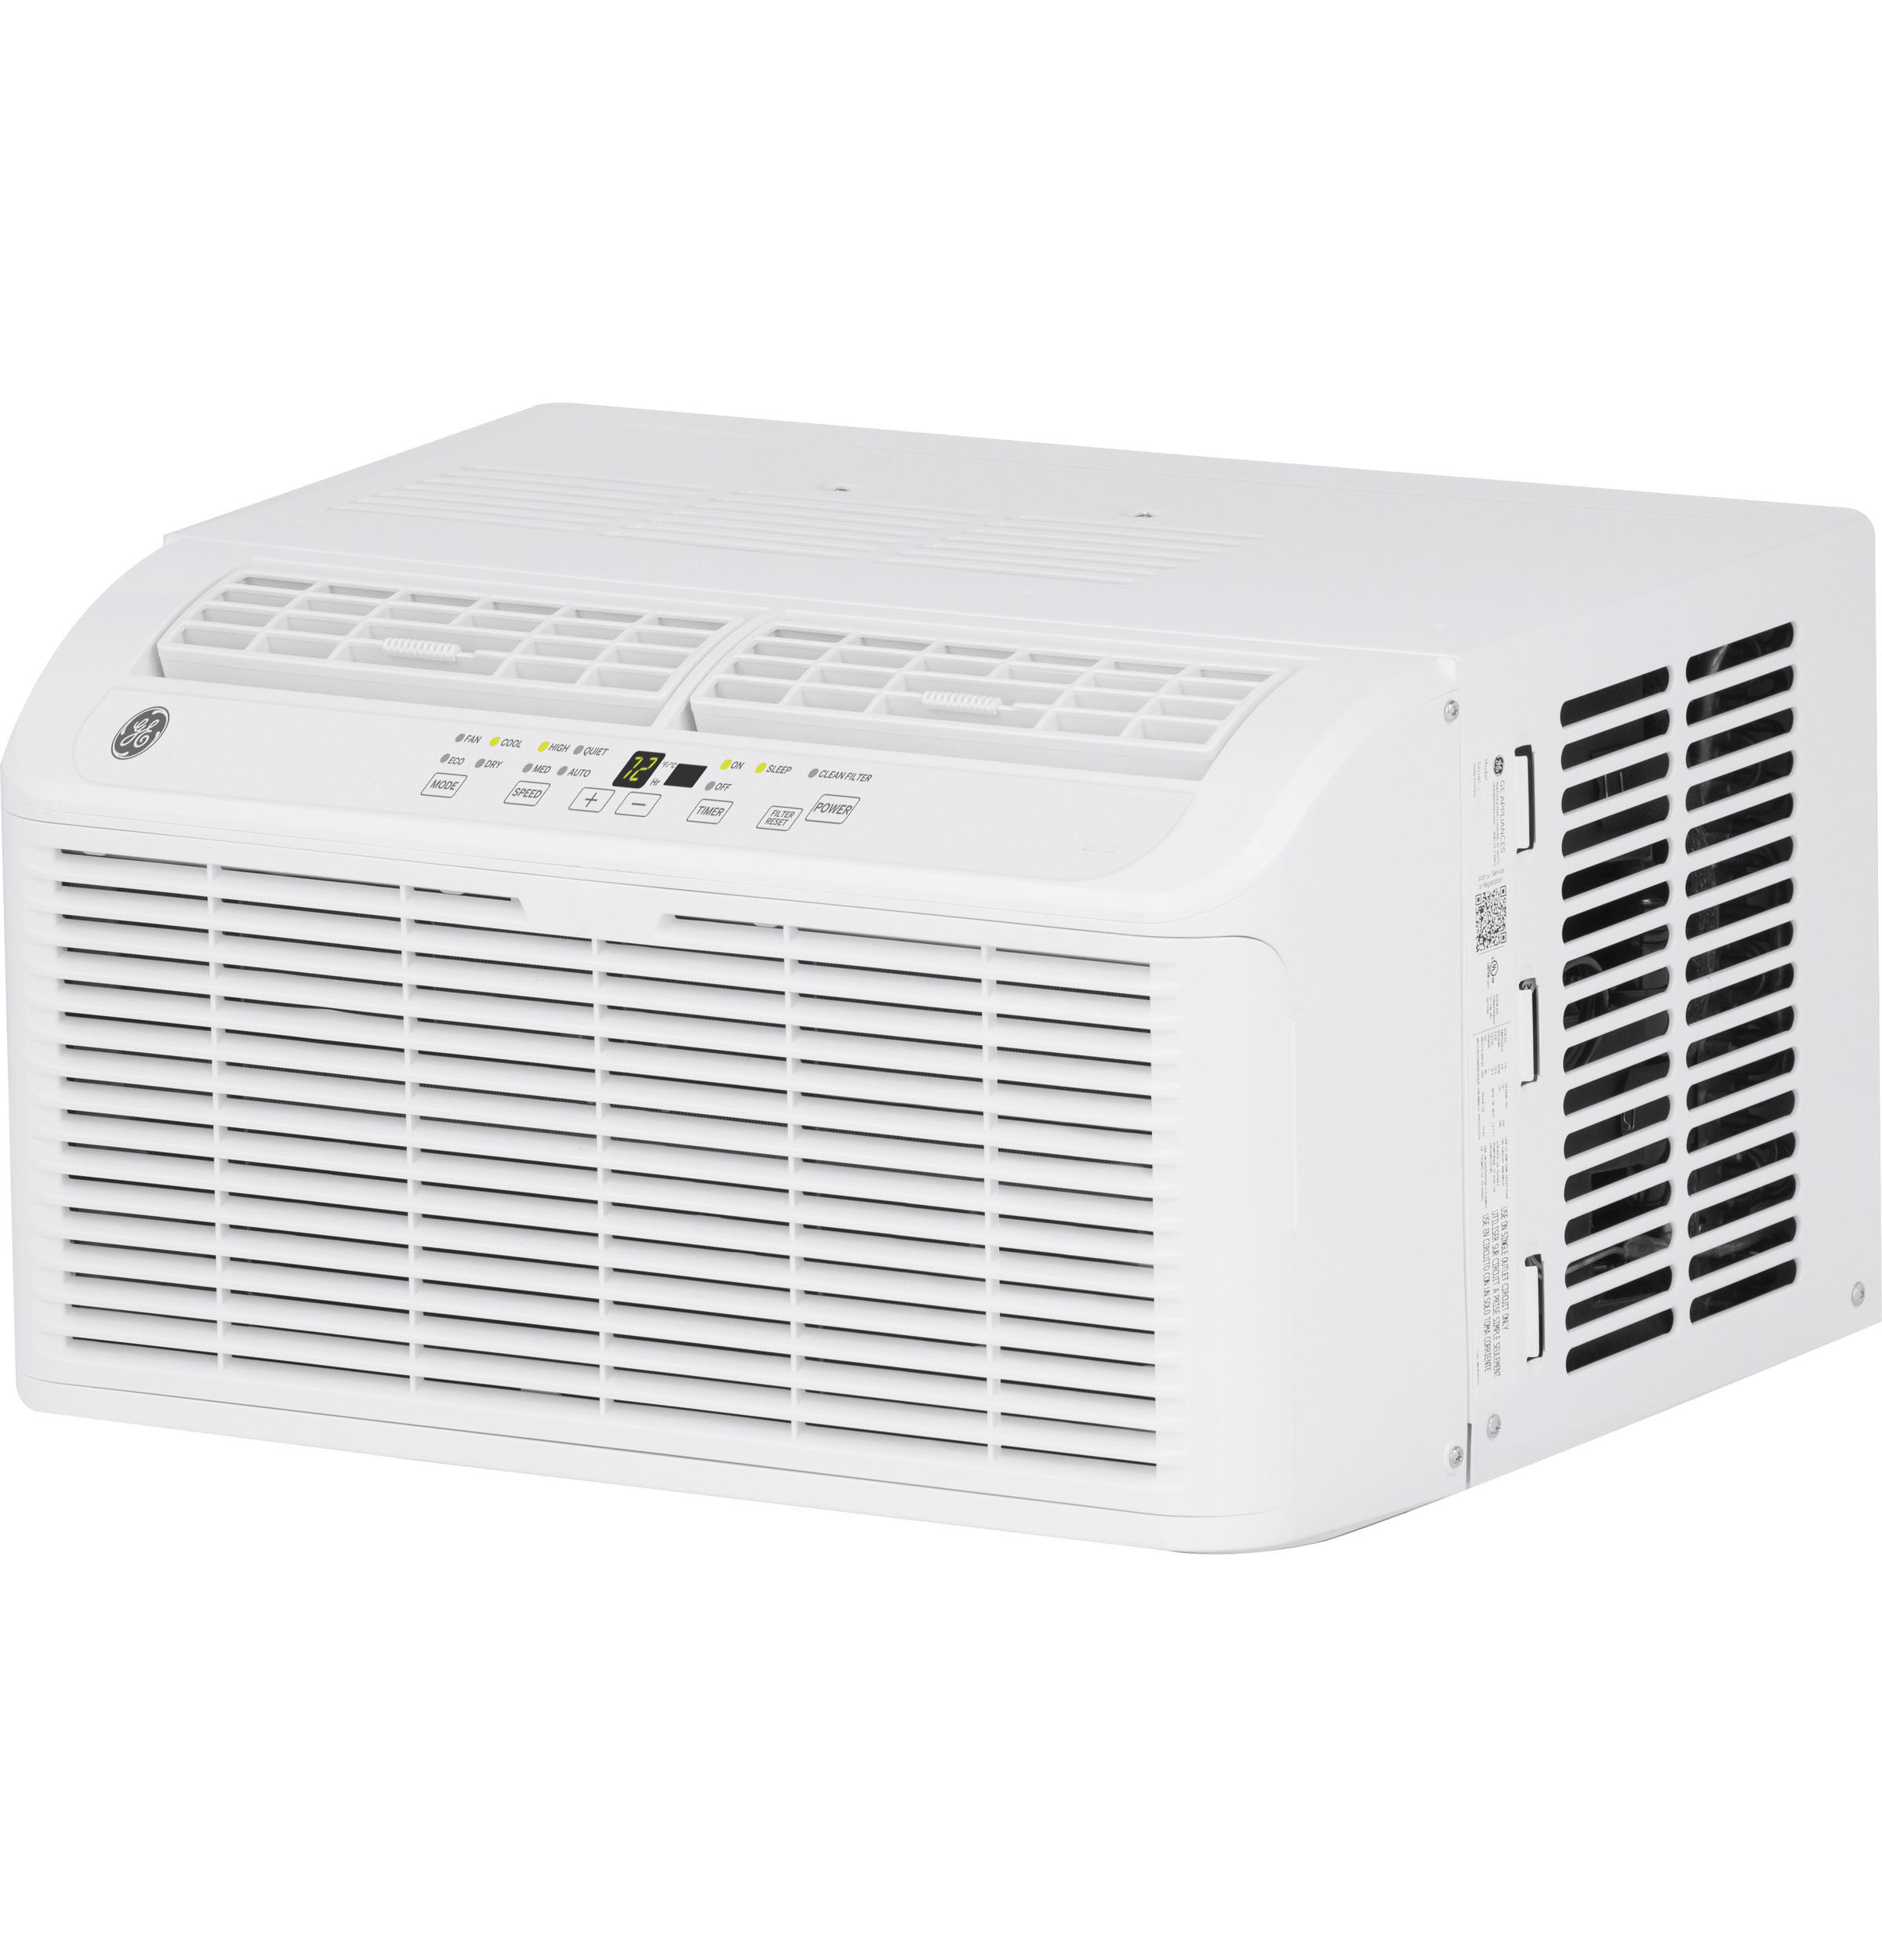 GE® 6,200 BTU Ultra Quiet Window Air Conditioner for Small Rooms up to 250 sq. ft.